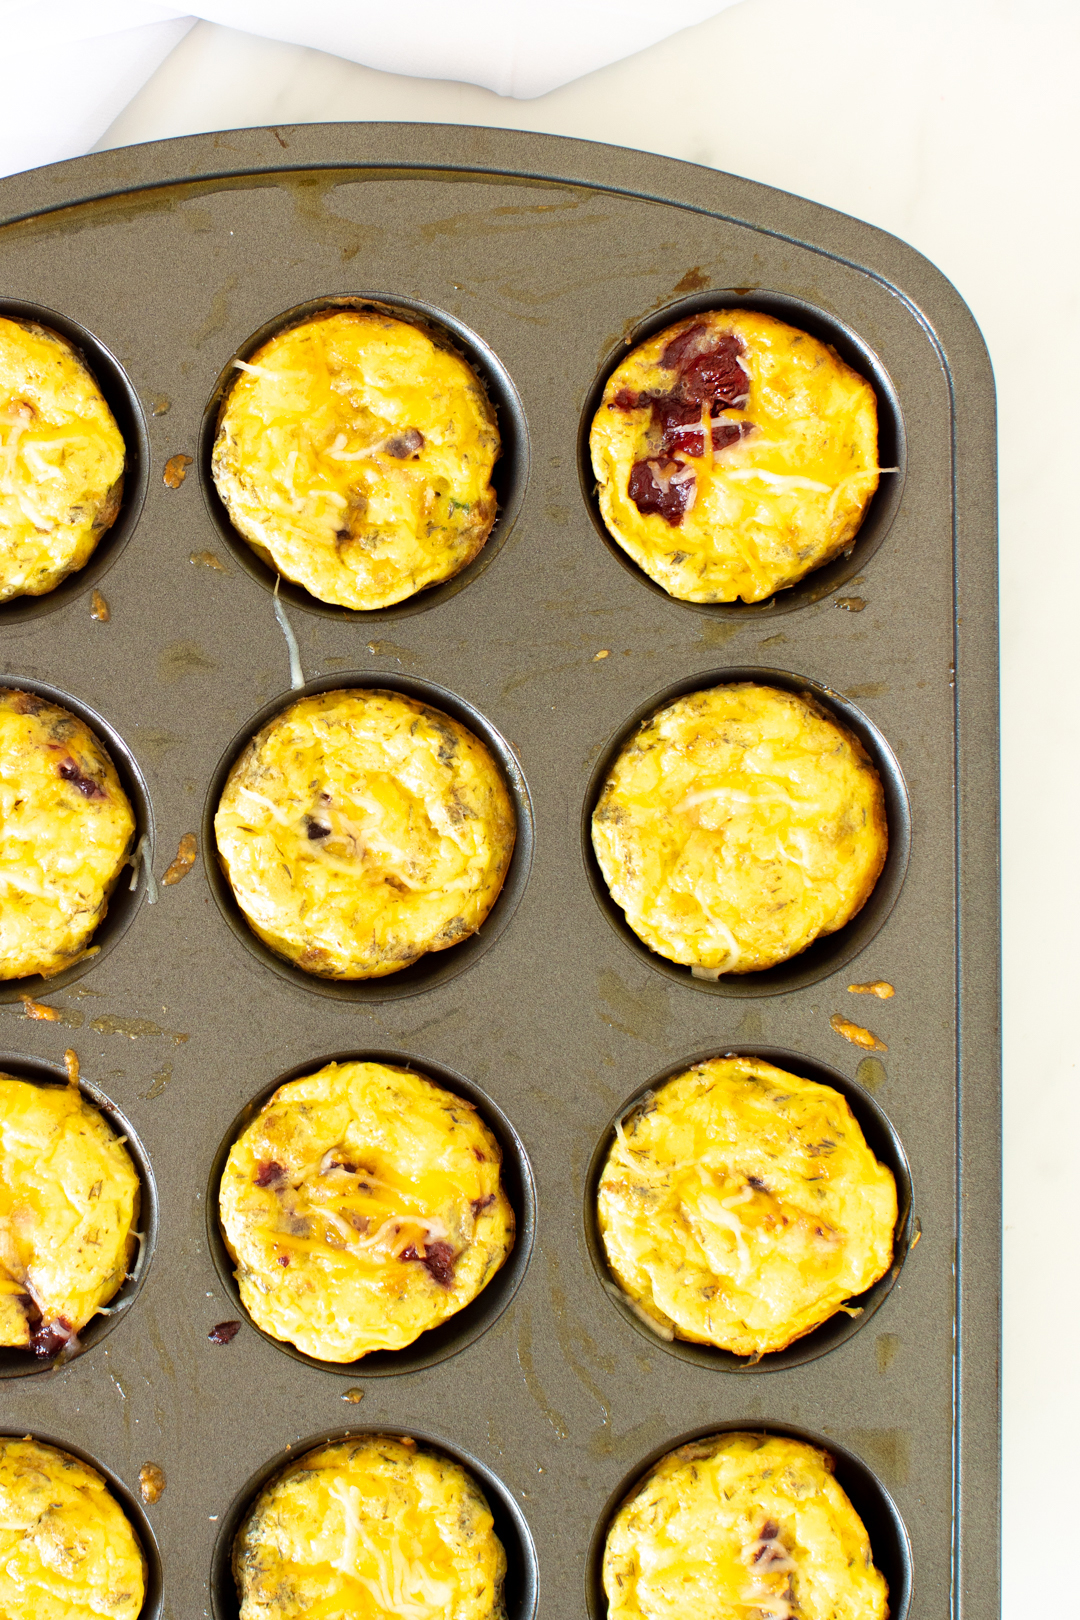 omelets made in a muffin tin using thanksgiving leftovers